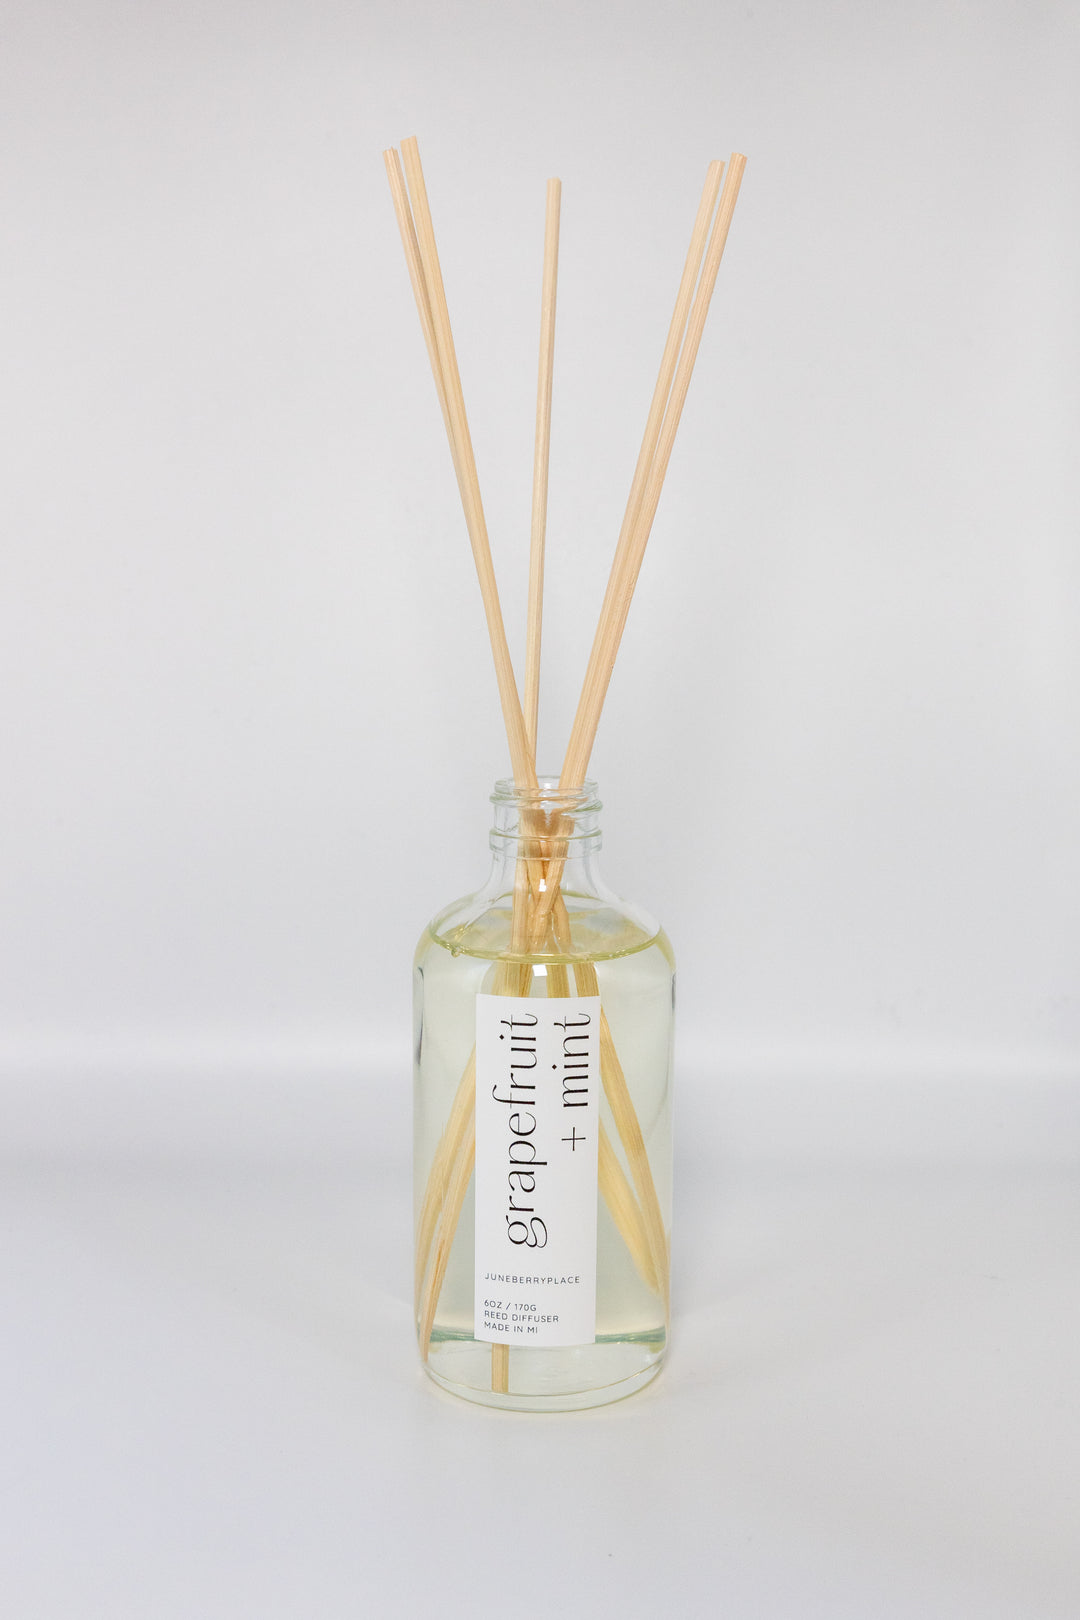 Grapefruit and Mint Reed Diffuser - Spring Collection in a glass bottle by juneberryplace home fragrances